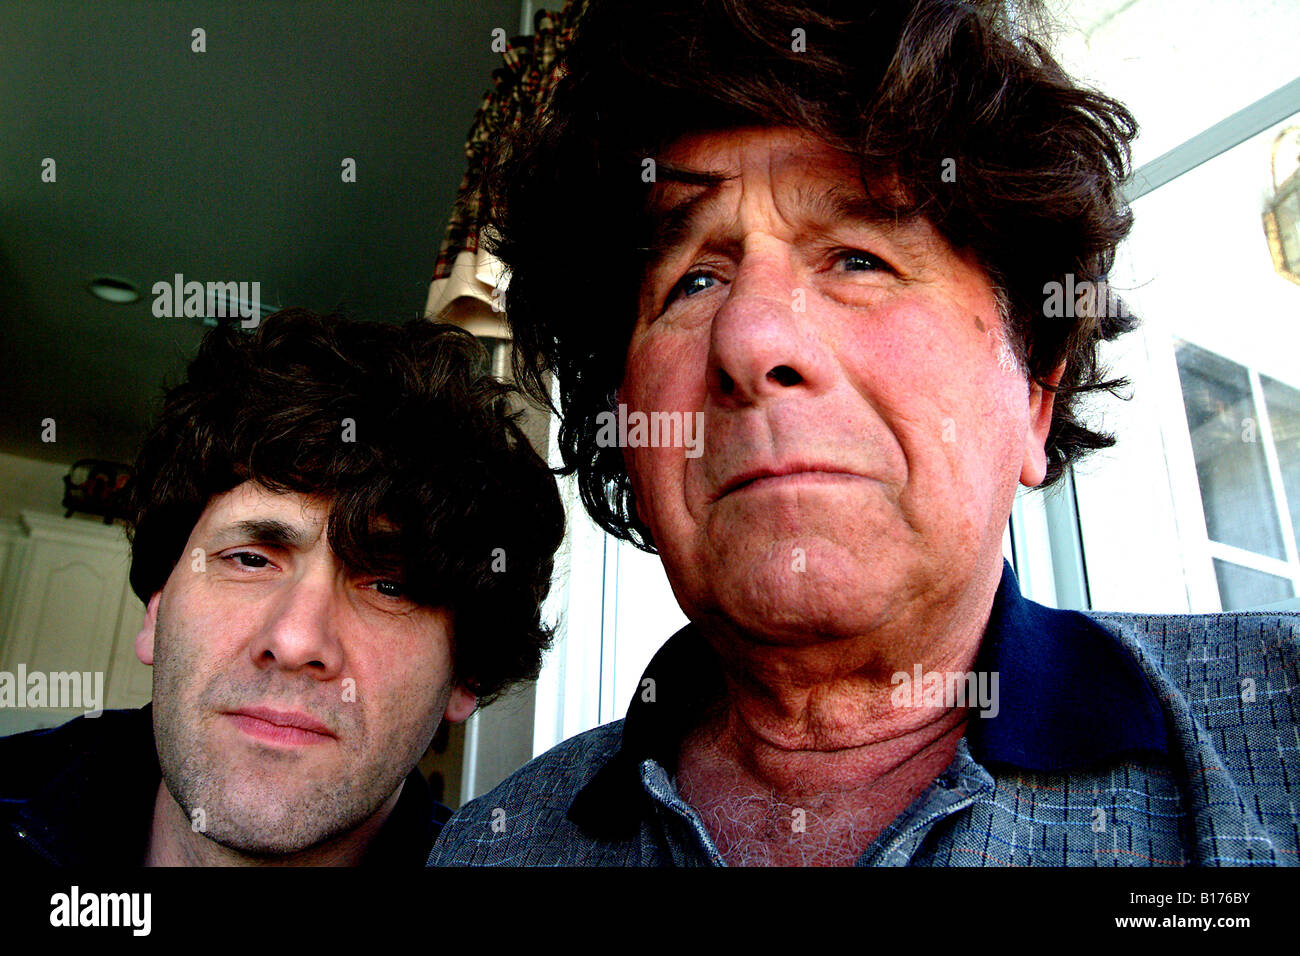 Younger man and an elderly man wearing  badly fitted wigs Stock Photo